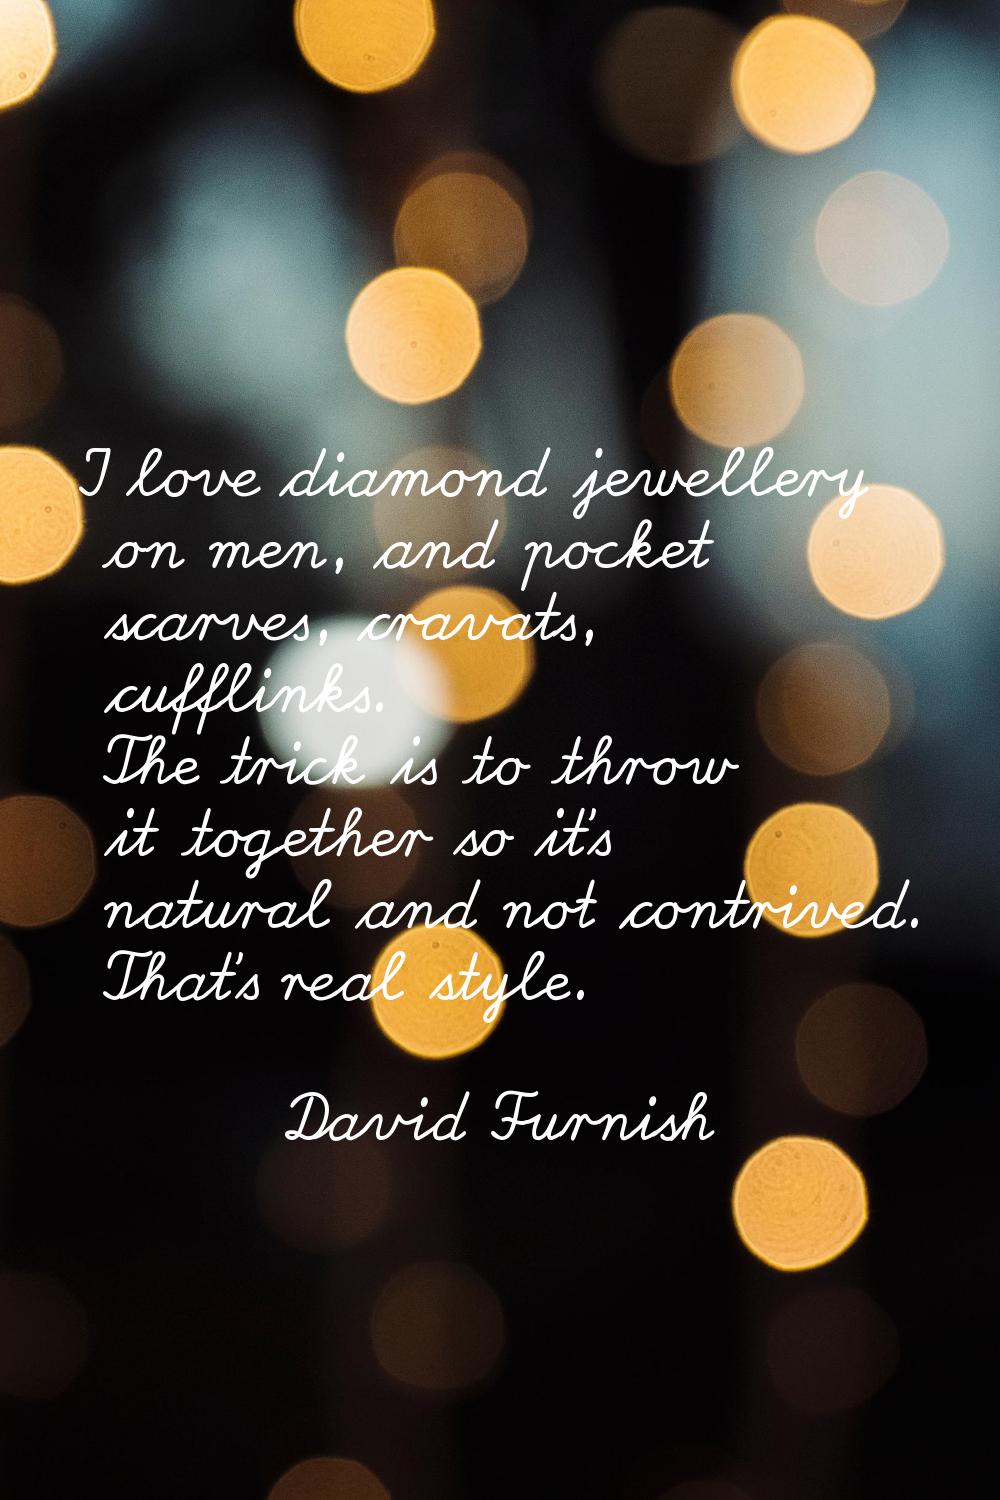 I love diamond jewellery on men, and pocket scarves, cravats, cufflinks. The trick is to throw it t